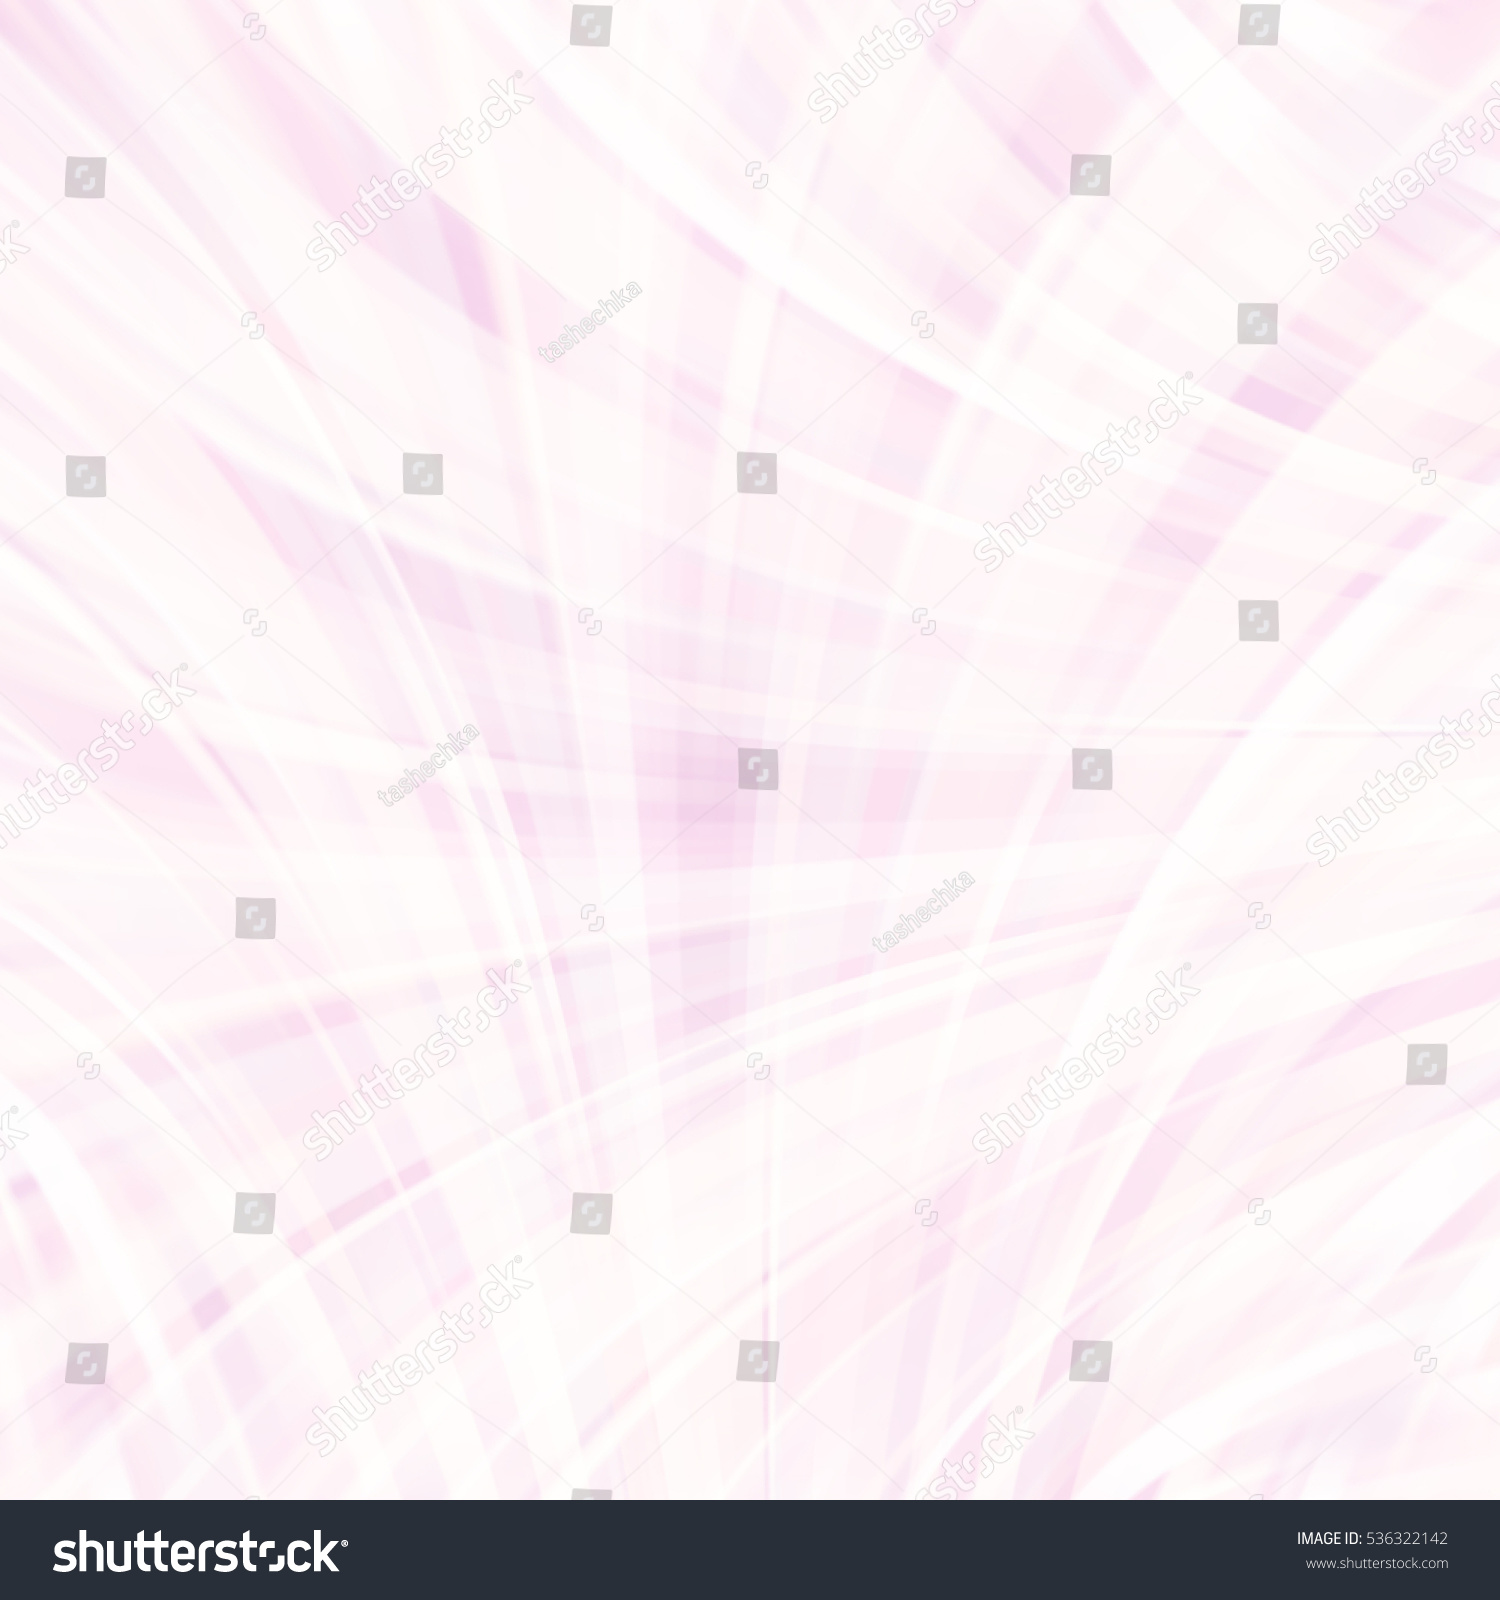 Illustration of pastel pink abstract background with blurred light curved lines. Geometric illustration. #536322142